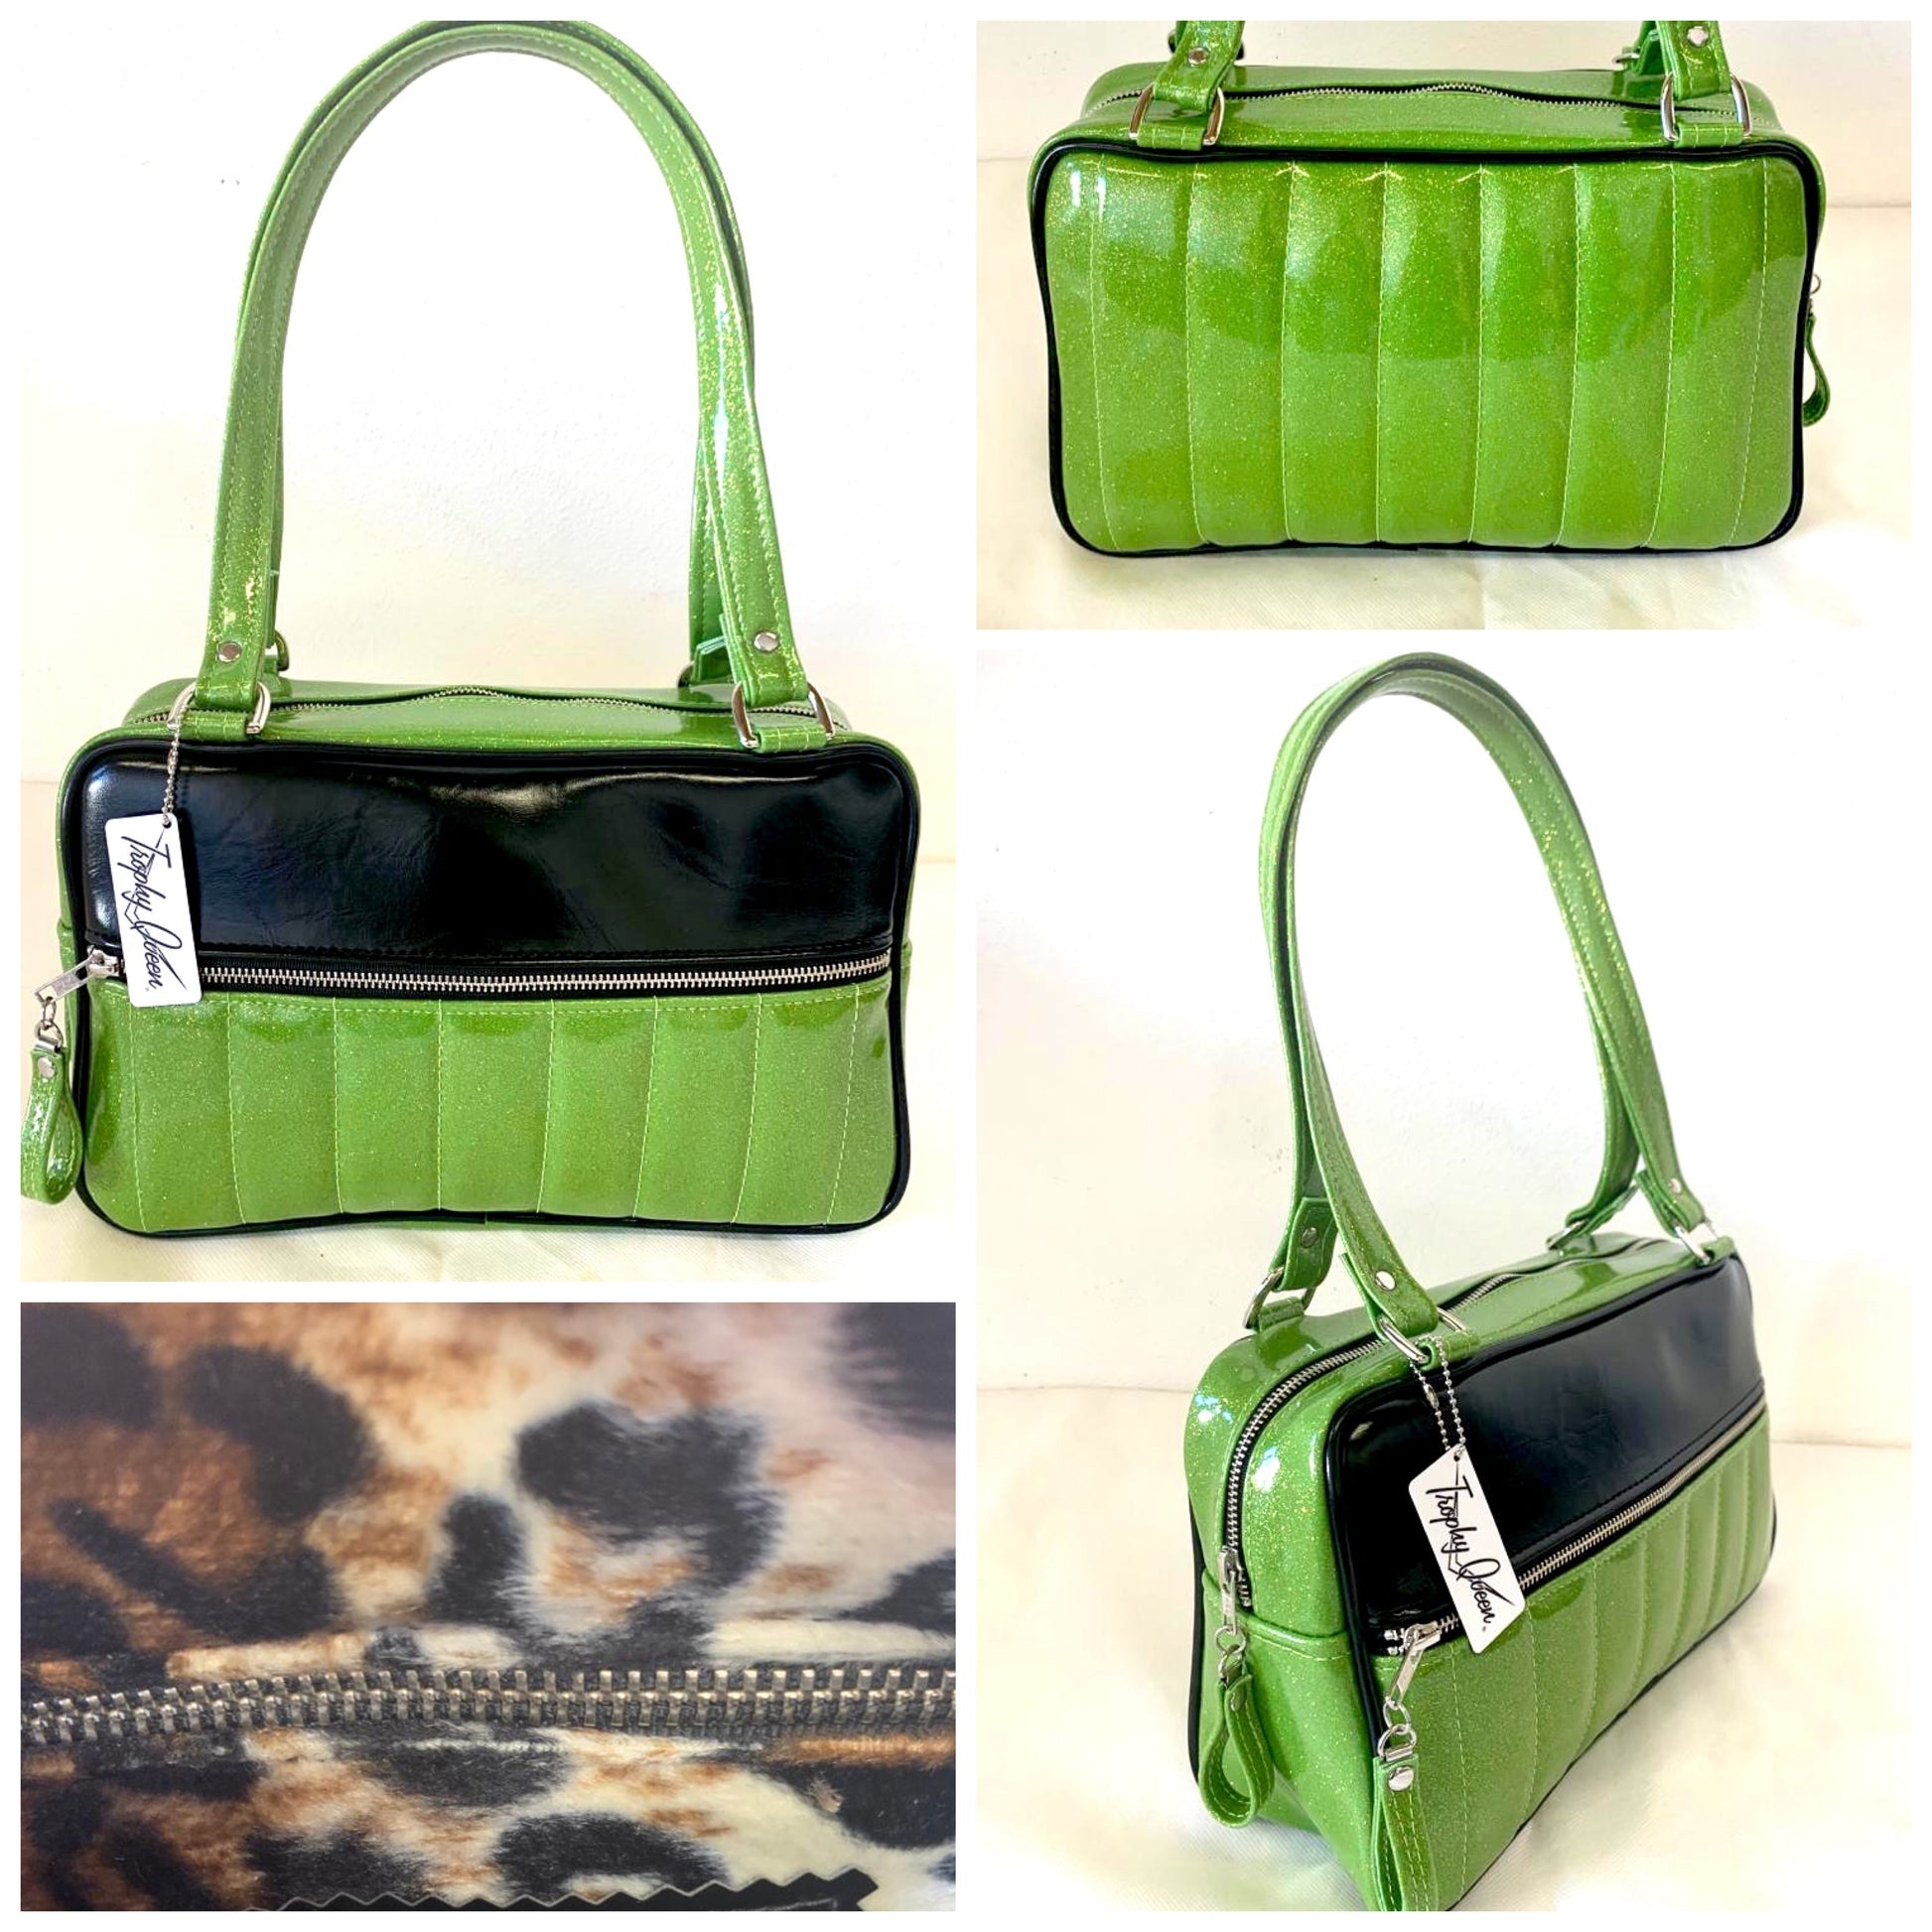 Fairlane Tote Bag in Lime Green Glitter Vinyl and Grease Black Vinyl with plush Leopard Lining. This purse has matching vinyl zipper pull, nickel feet, inside zipper pocket with serial number and open divided pocket with signature Trophy Queen label. The straps are approximately 25” and come with an extra set of replacement straps. Locally made and ships from California.